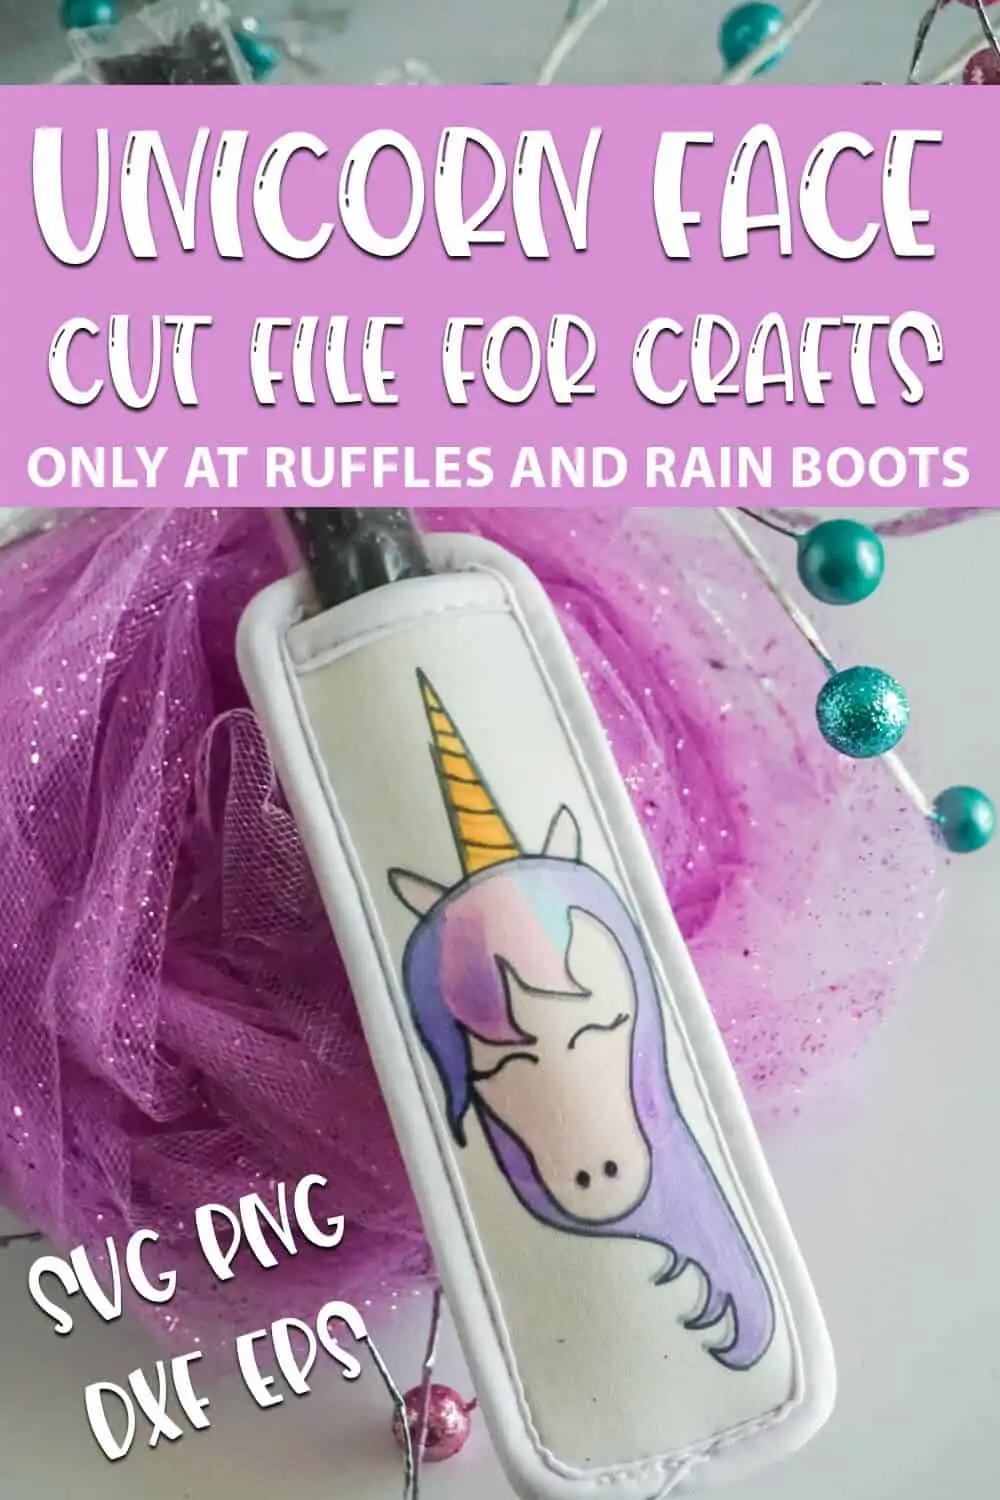 face unicorn svg for cricut or silhouette with text which reads unicorn face cut file for crafts svg png dxf eps